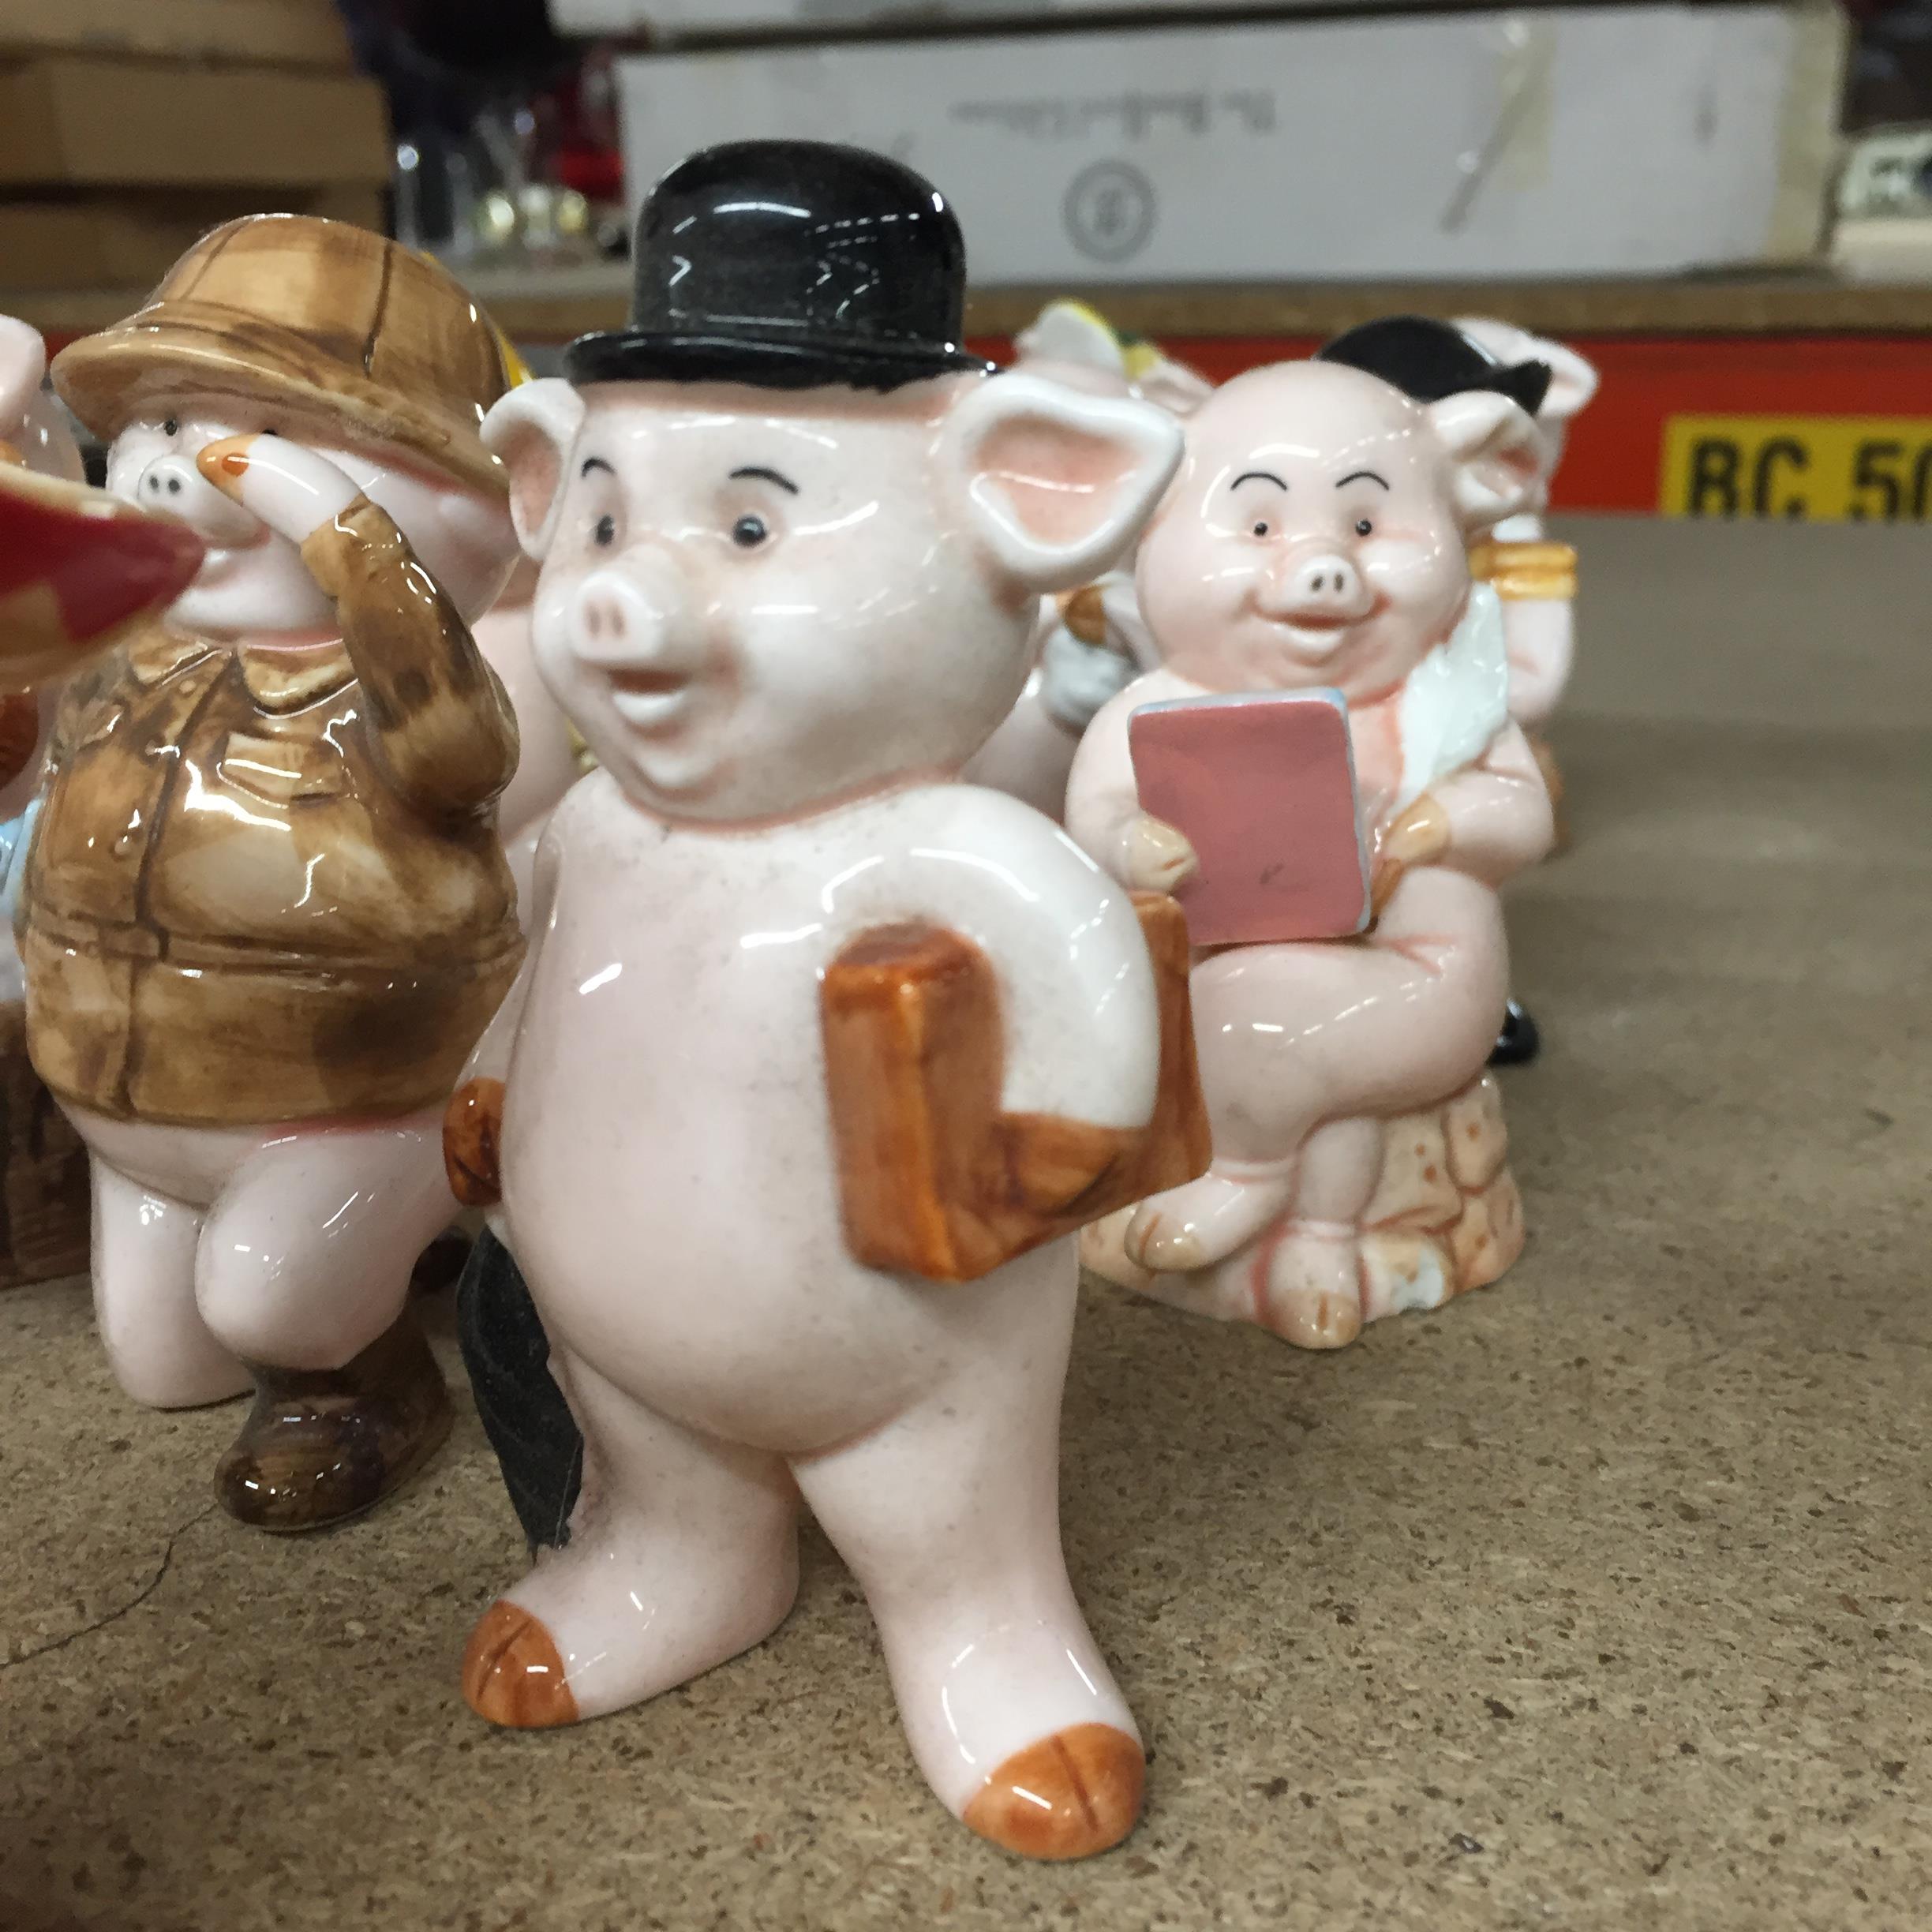 A COLLECTION OF 'PIGGIES' CERAMIC PIG FIGURES - Image 3 of 5